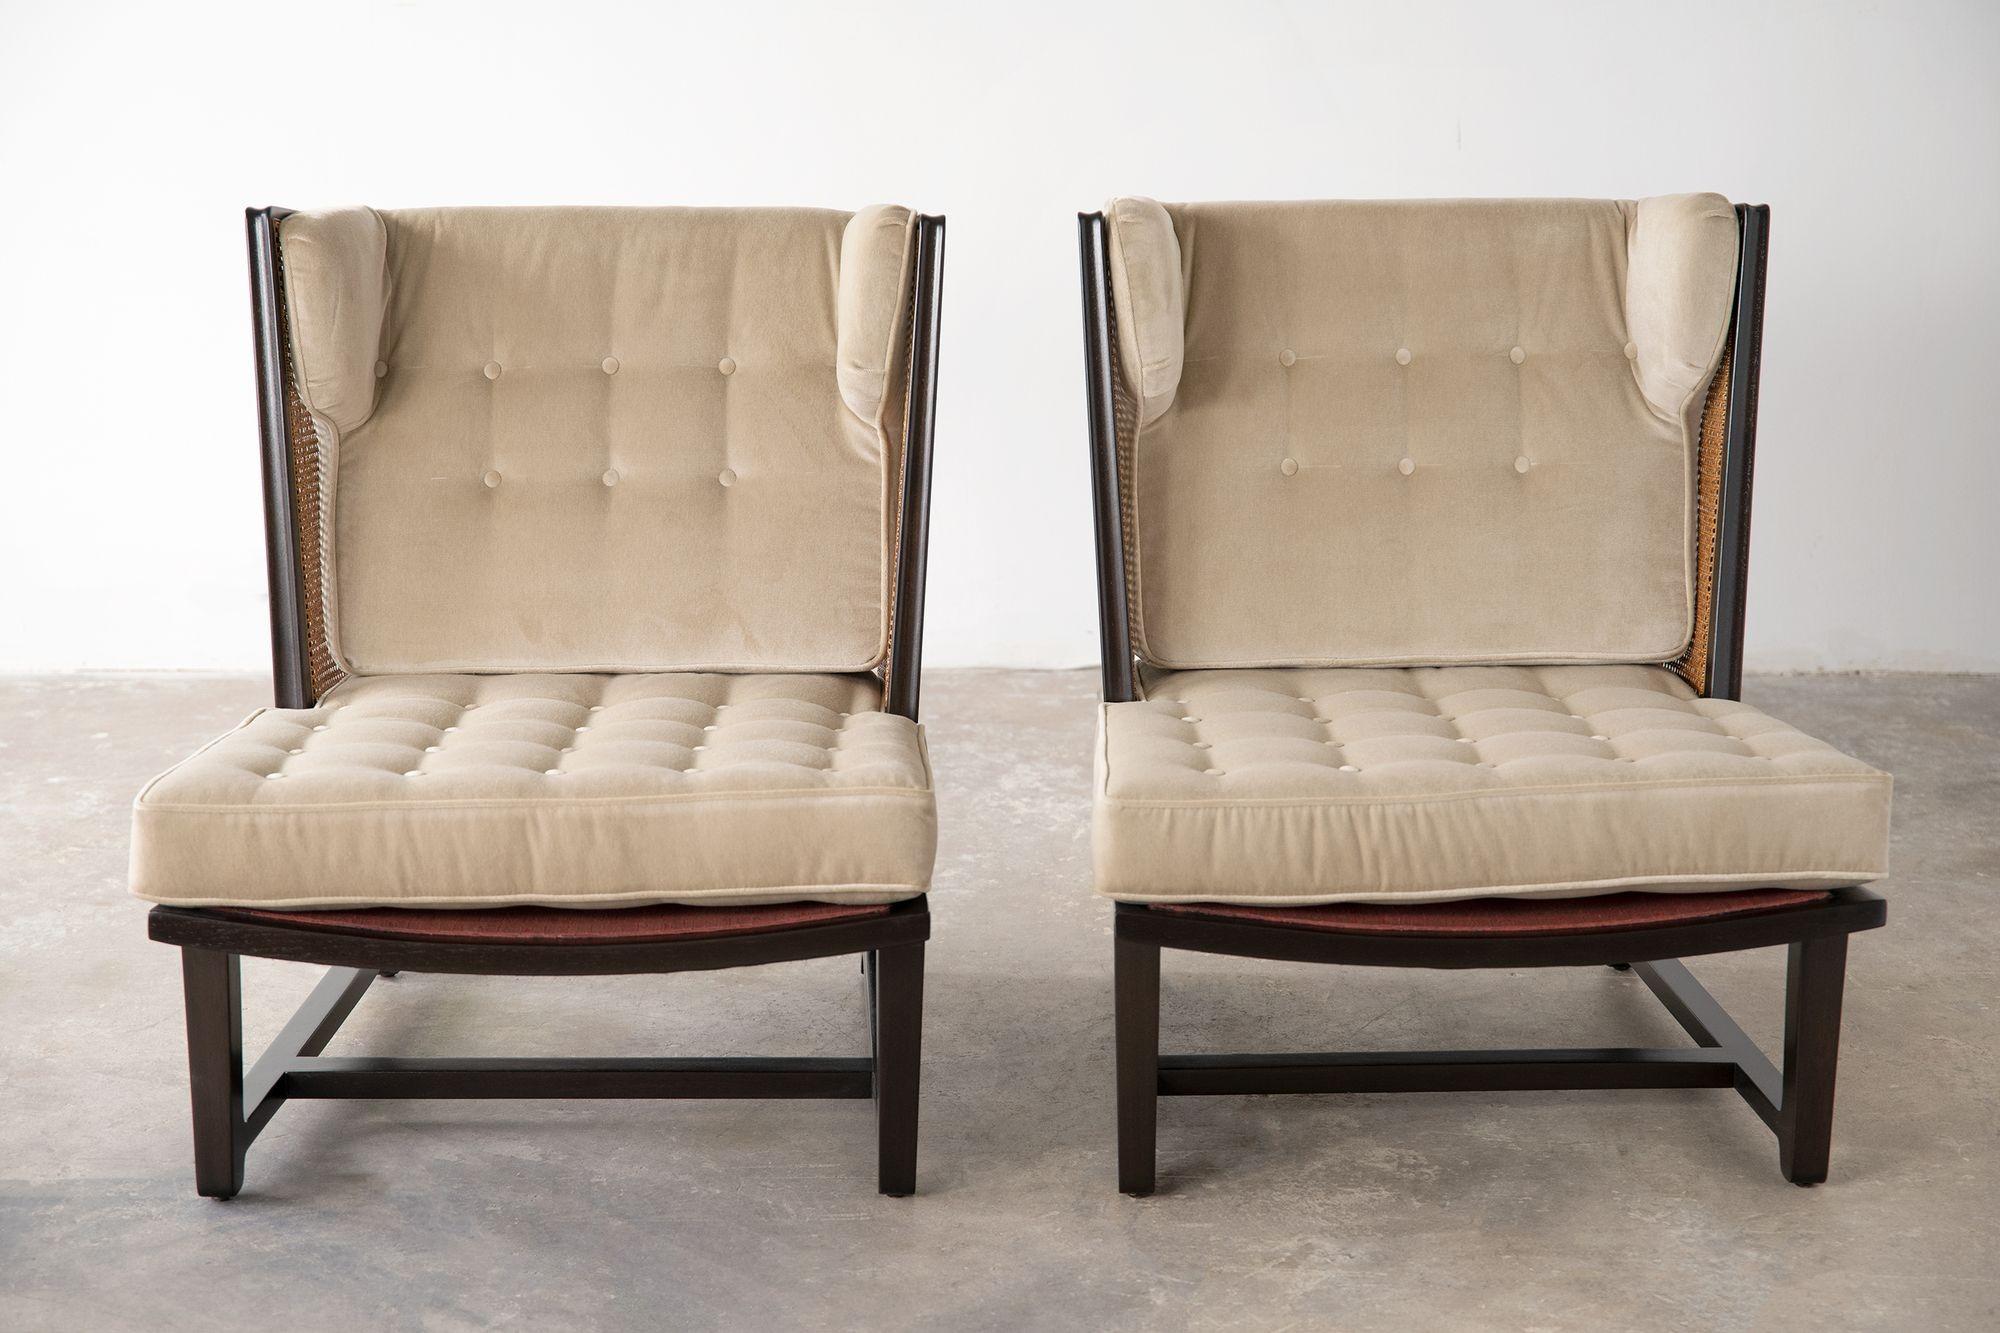 American Edward Wormley Wing Lounge Chairs for Dunbar Model 6016 Pair in Cane & Mahogany